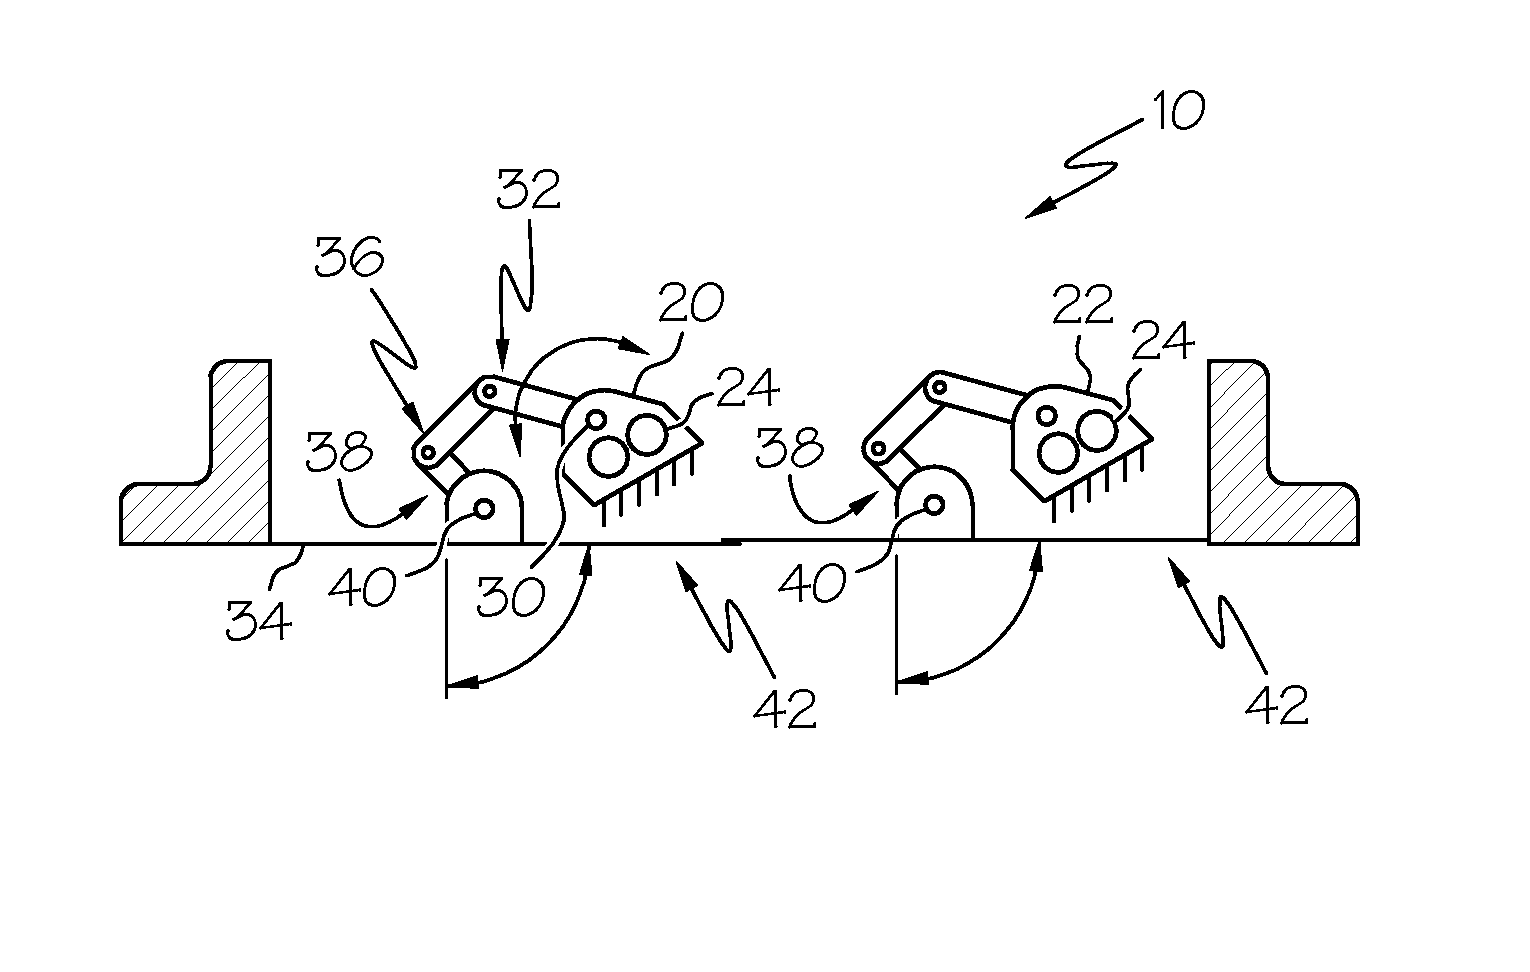 Thrust recovery, or other valve, containing two independently actuated doors and control system